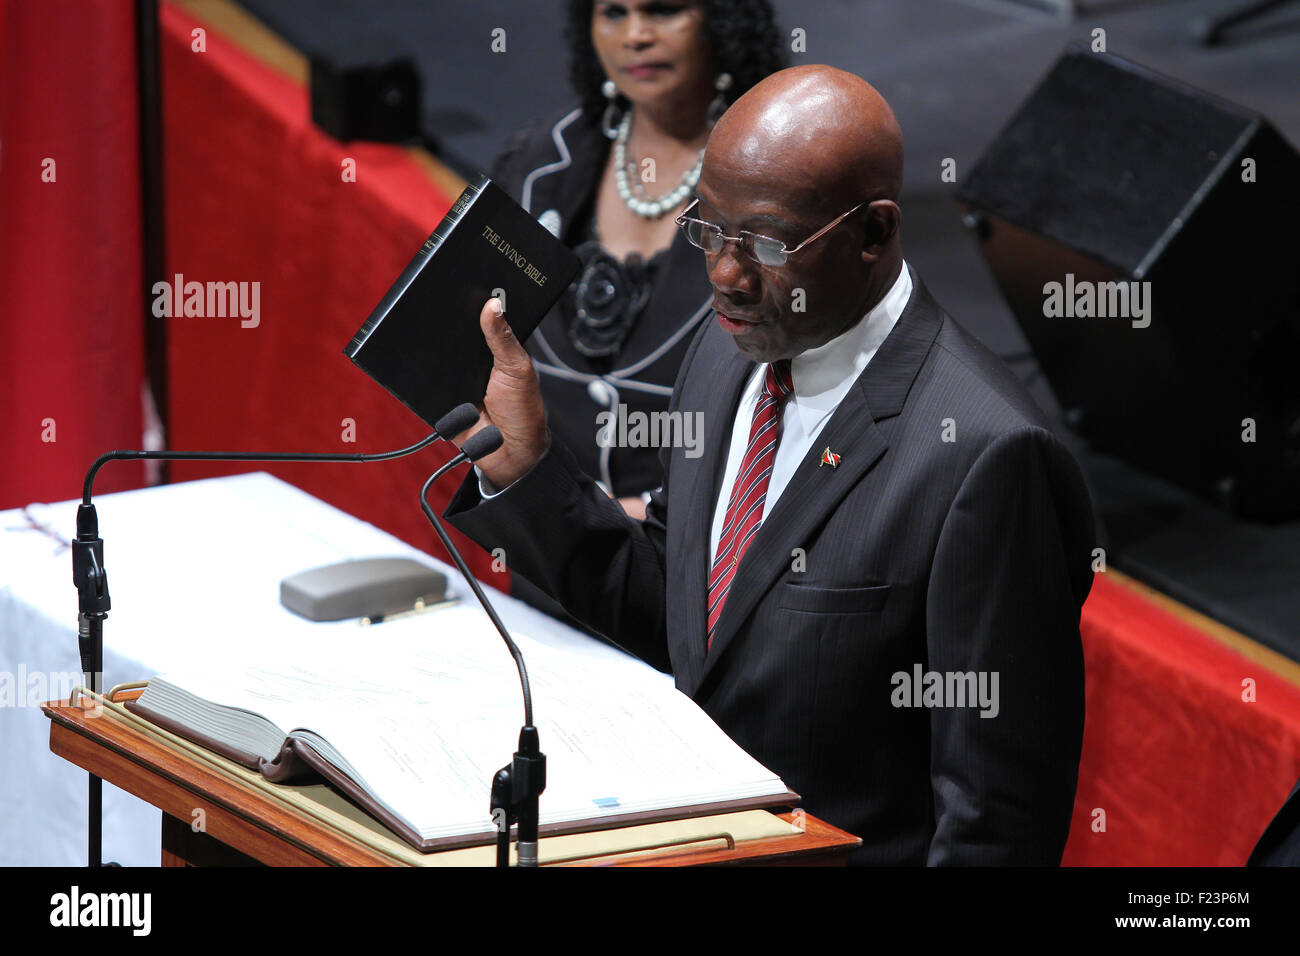 Port of Spain, Trinidad & Tobago. 9th September, 2015. Keith Christopher Rowley takes the oath off office as the new Prime Minister of Trinidad & Tobago at Queen's Hall in Port of Spain, Trinidad on September 9, 2015.  (Photo by Sean Drakes/Alamy Live News) Credit:  SEAN DRAKES/Alamy Live News Stock Photo